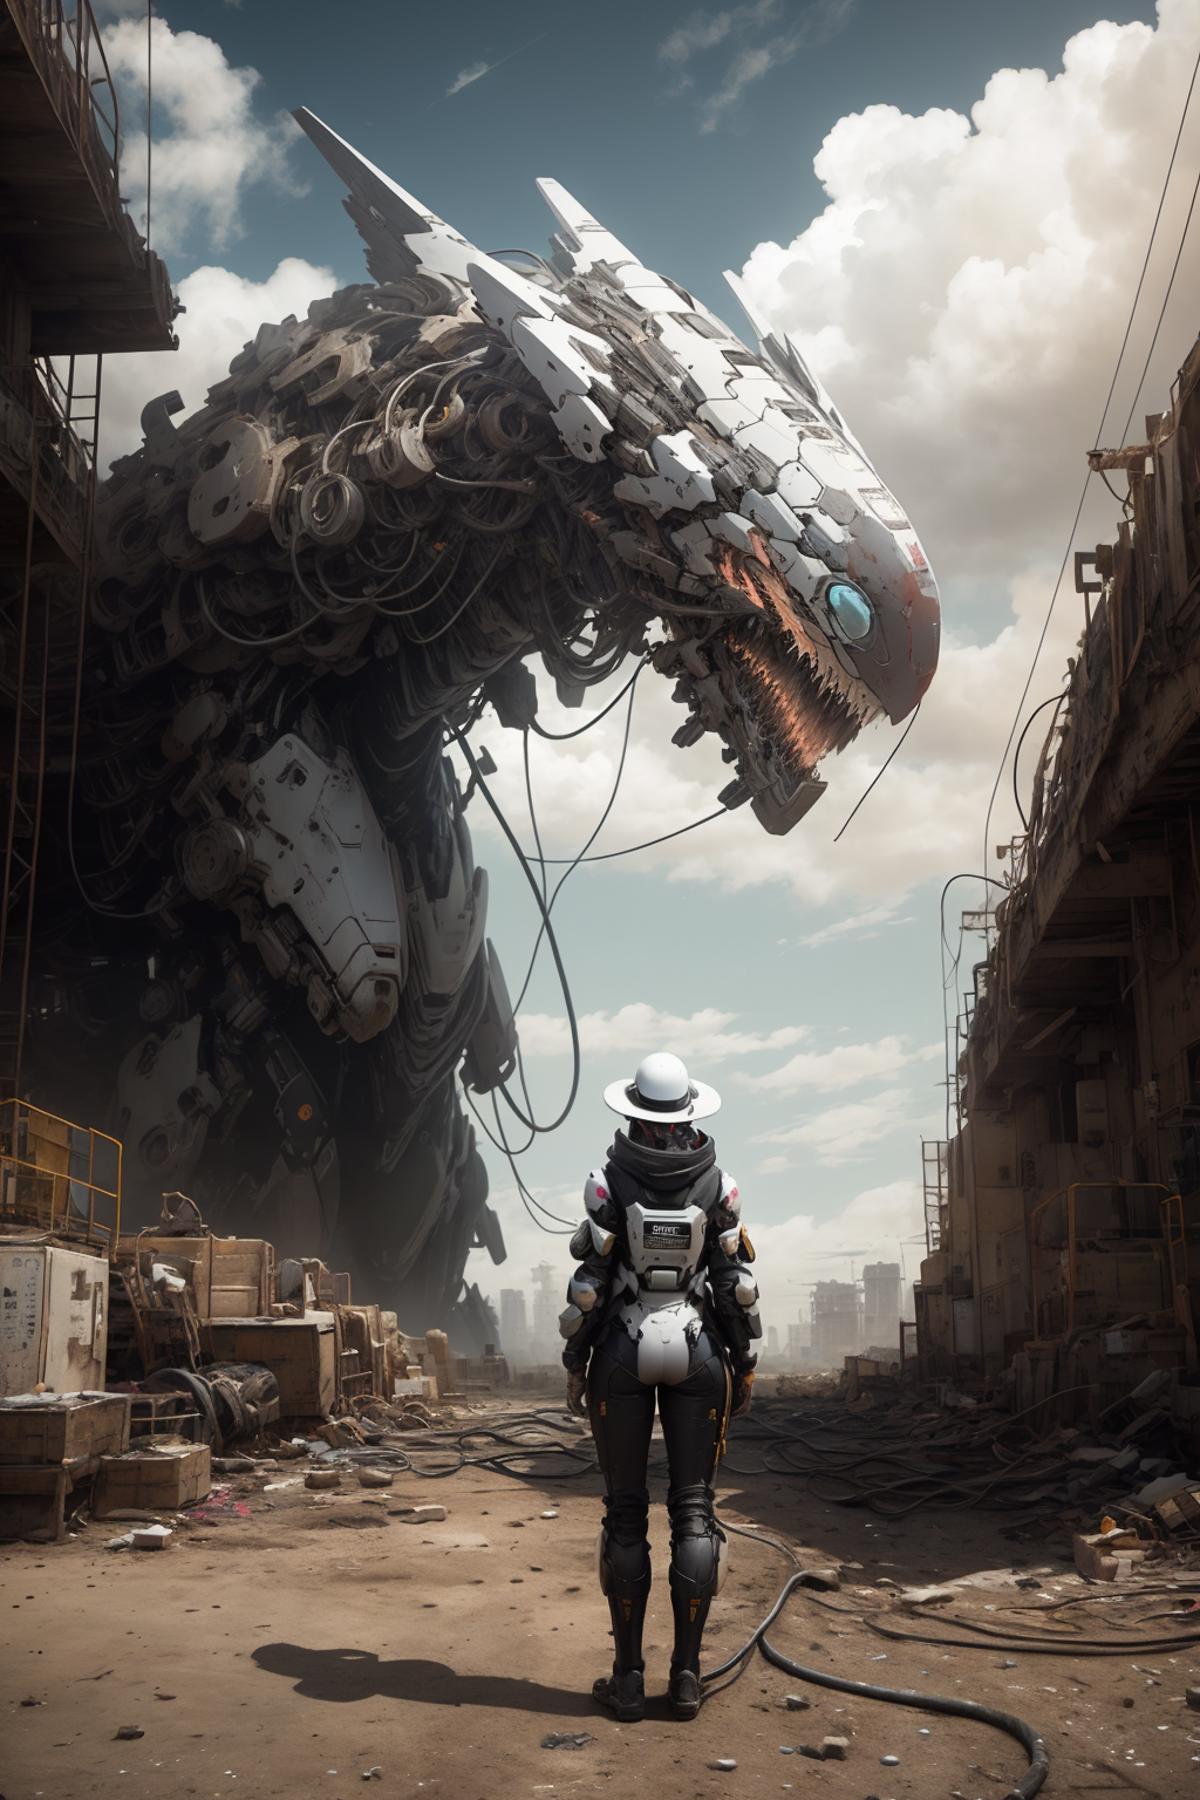 A person standing in front of a giant robot or monster.